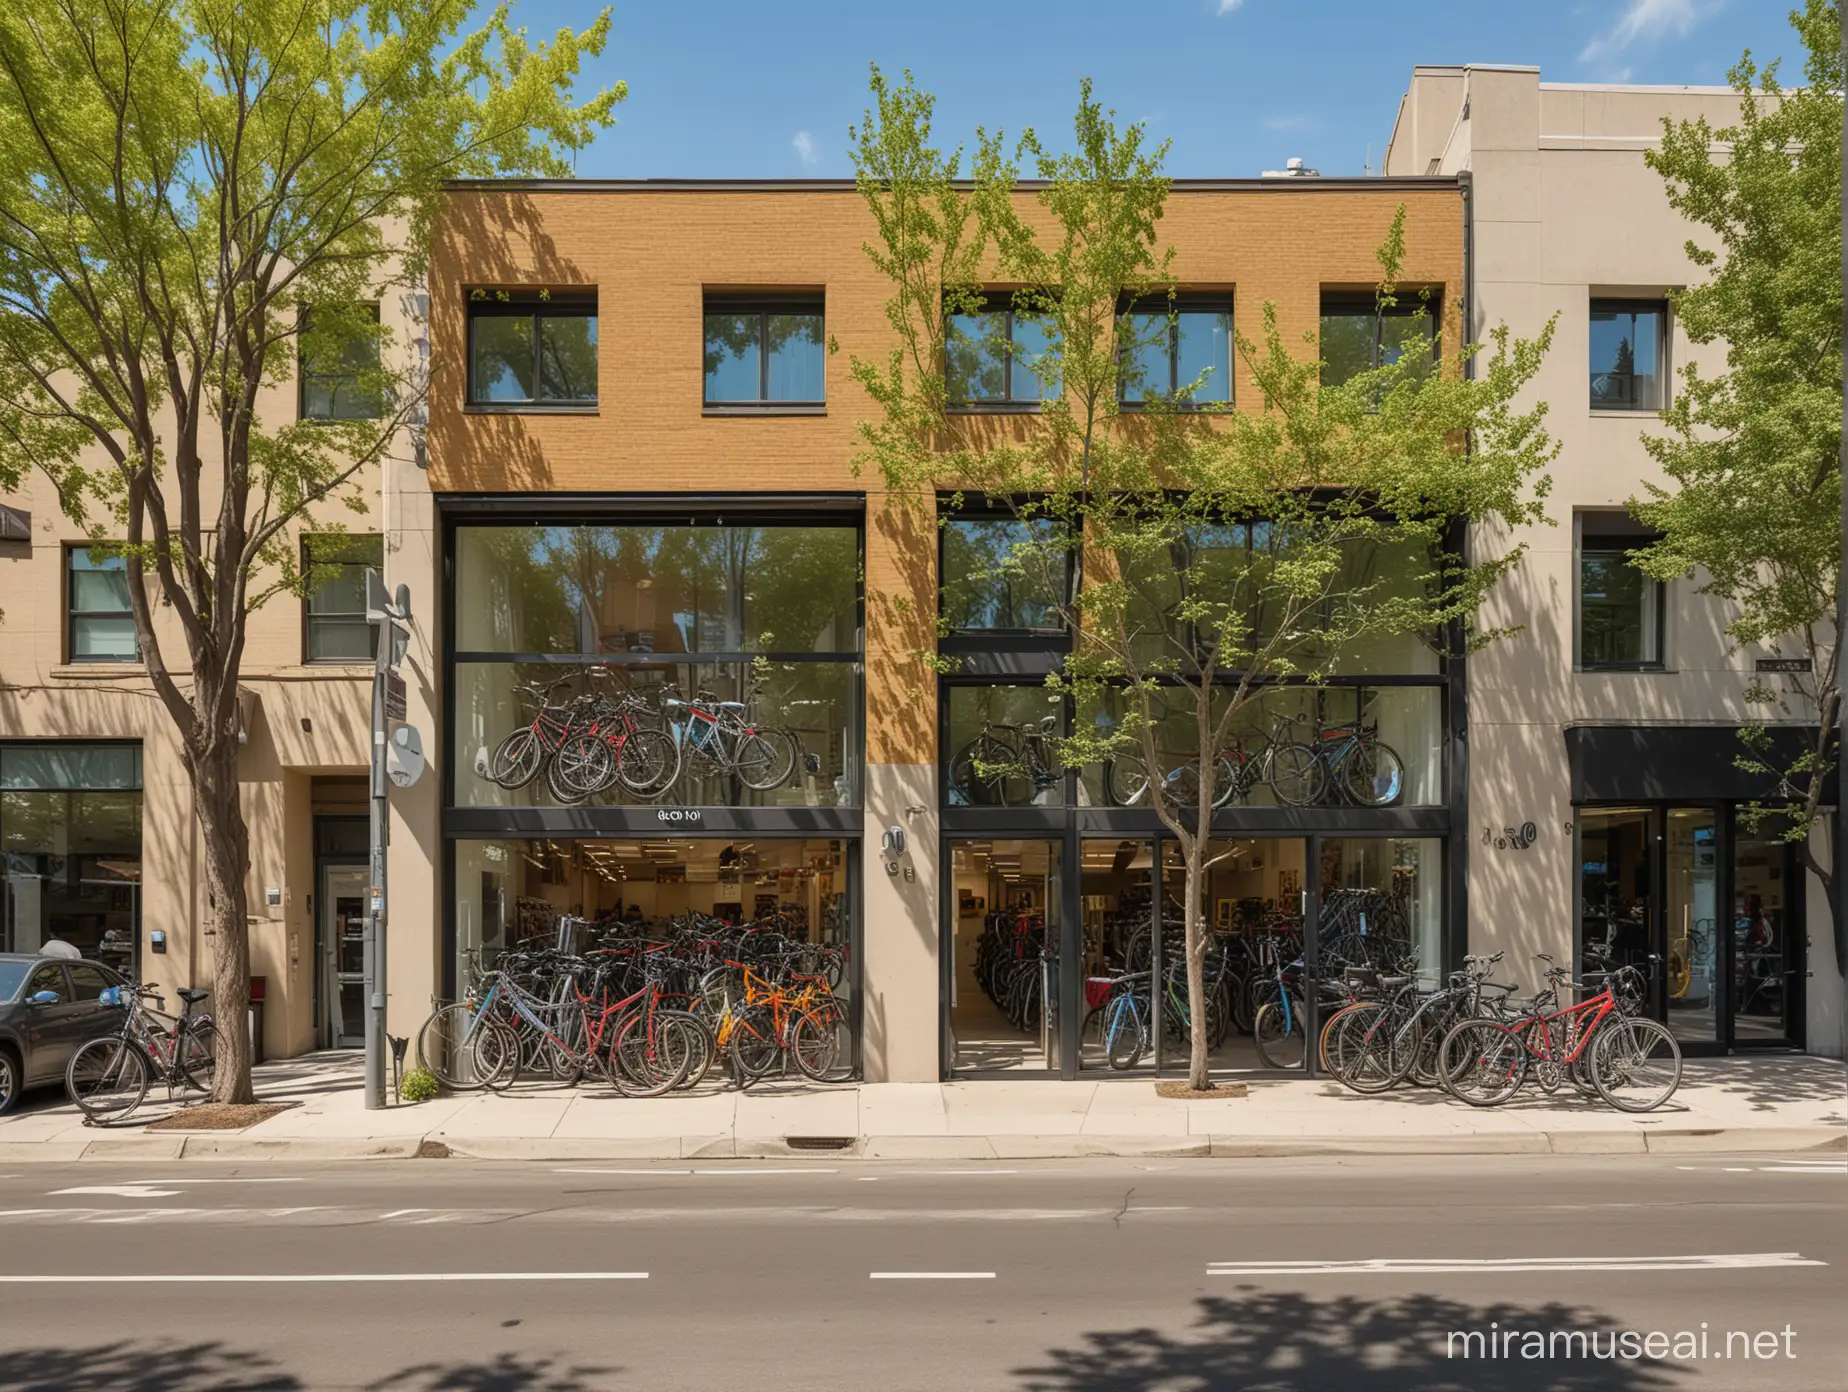 16k, high detail, bright spring sunny colors, professional photo, two-story bike store next to a city thoroughfare, located in a small oasis of trees between high-rise buildings